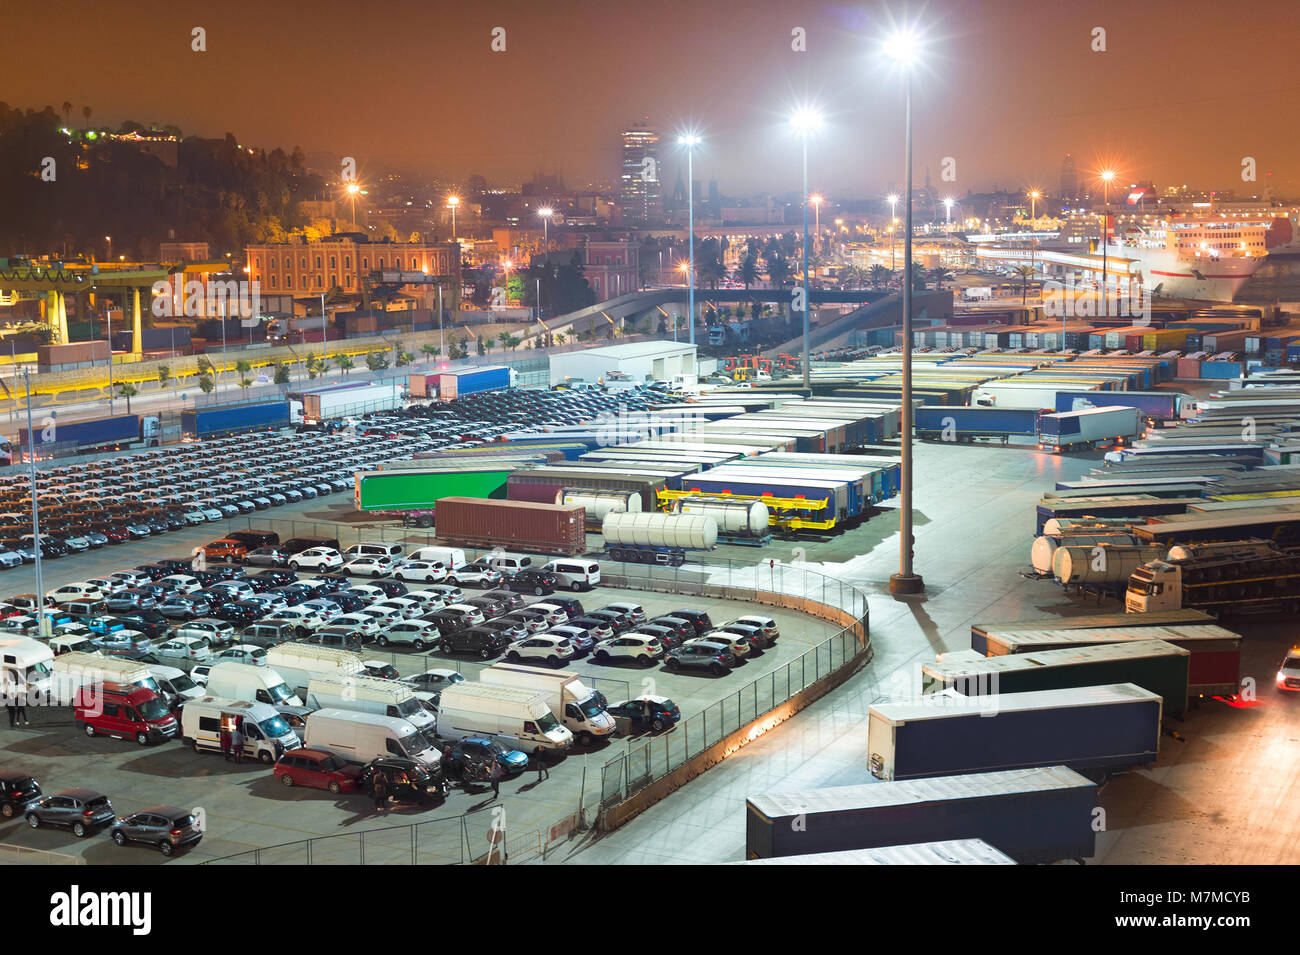 Cars and trucks on a large parking space at Barcelona industrial port at night. Spain Stock Photo